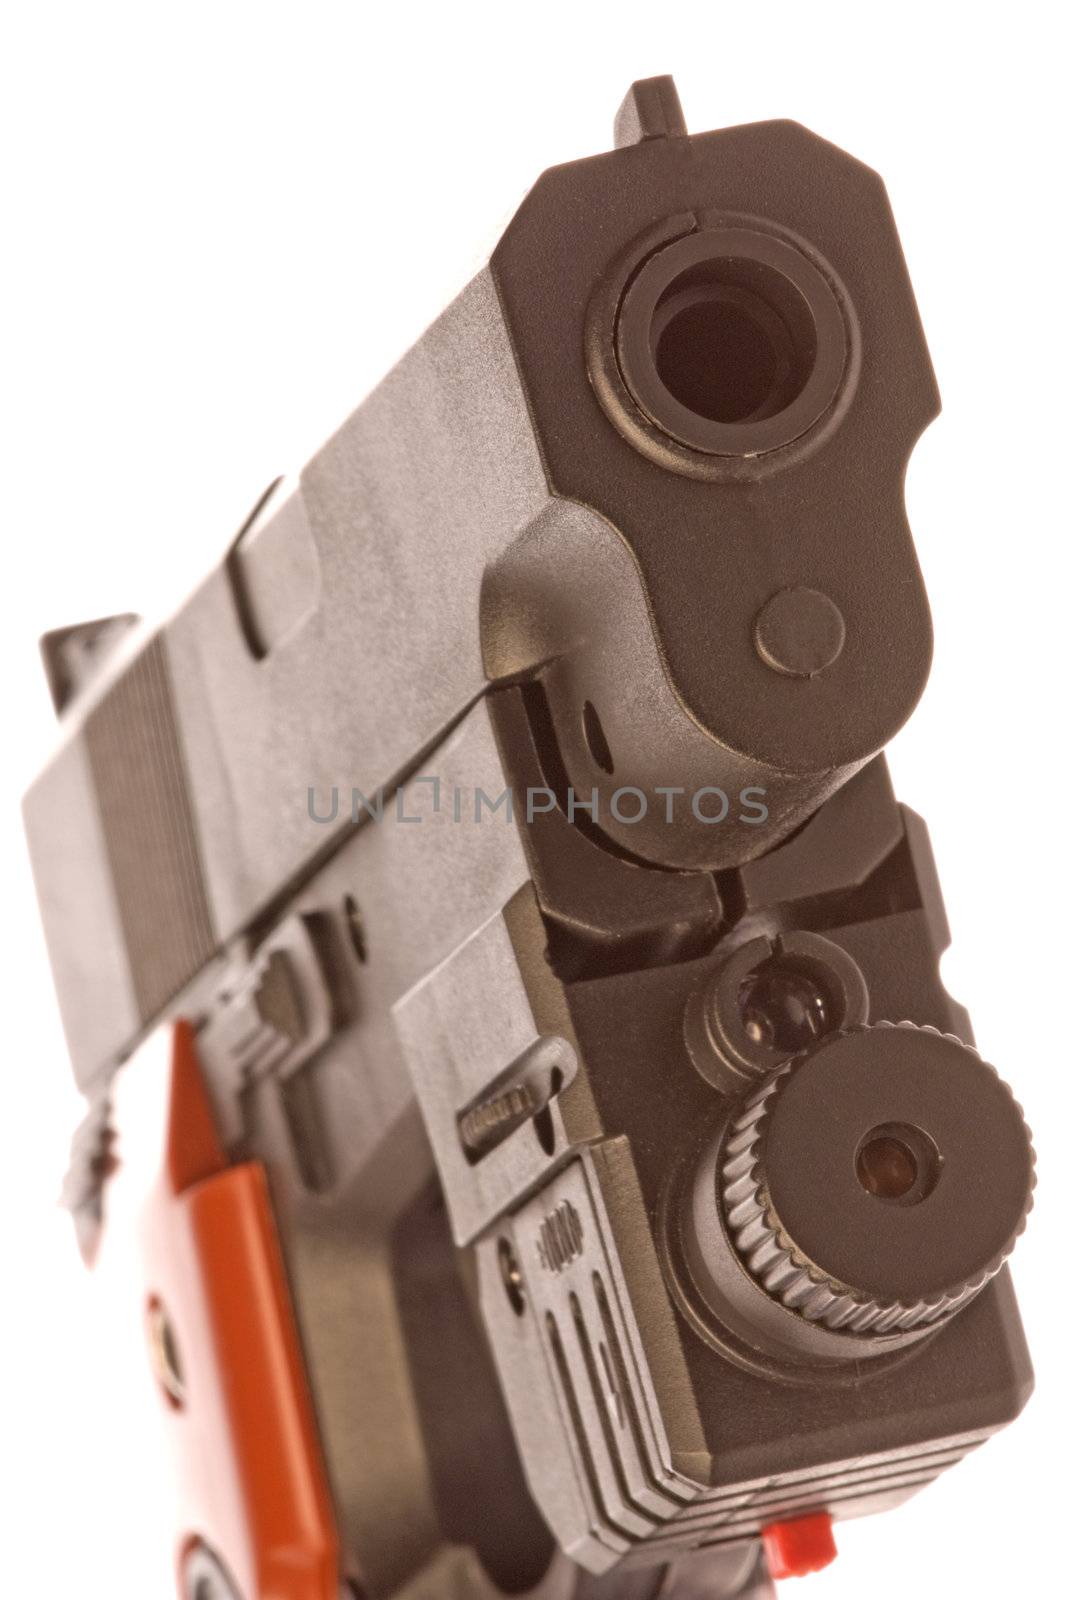 Isolated image of a toy gun